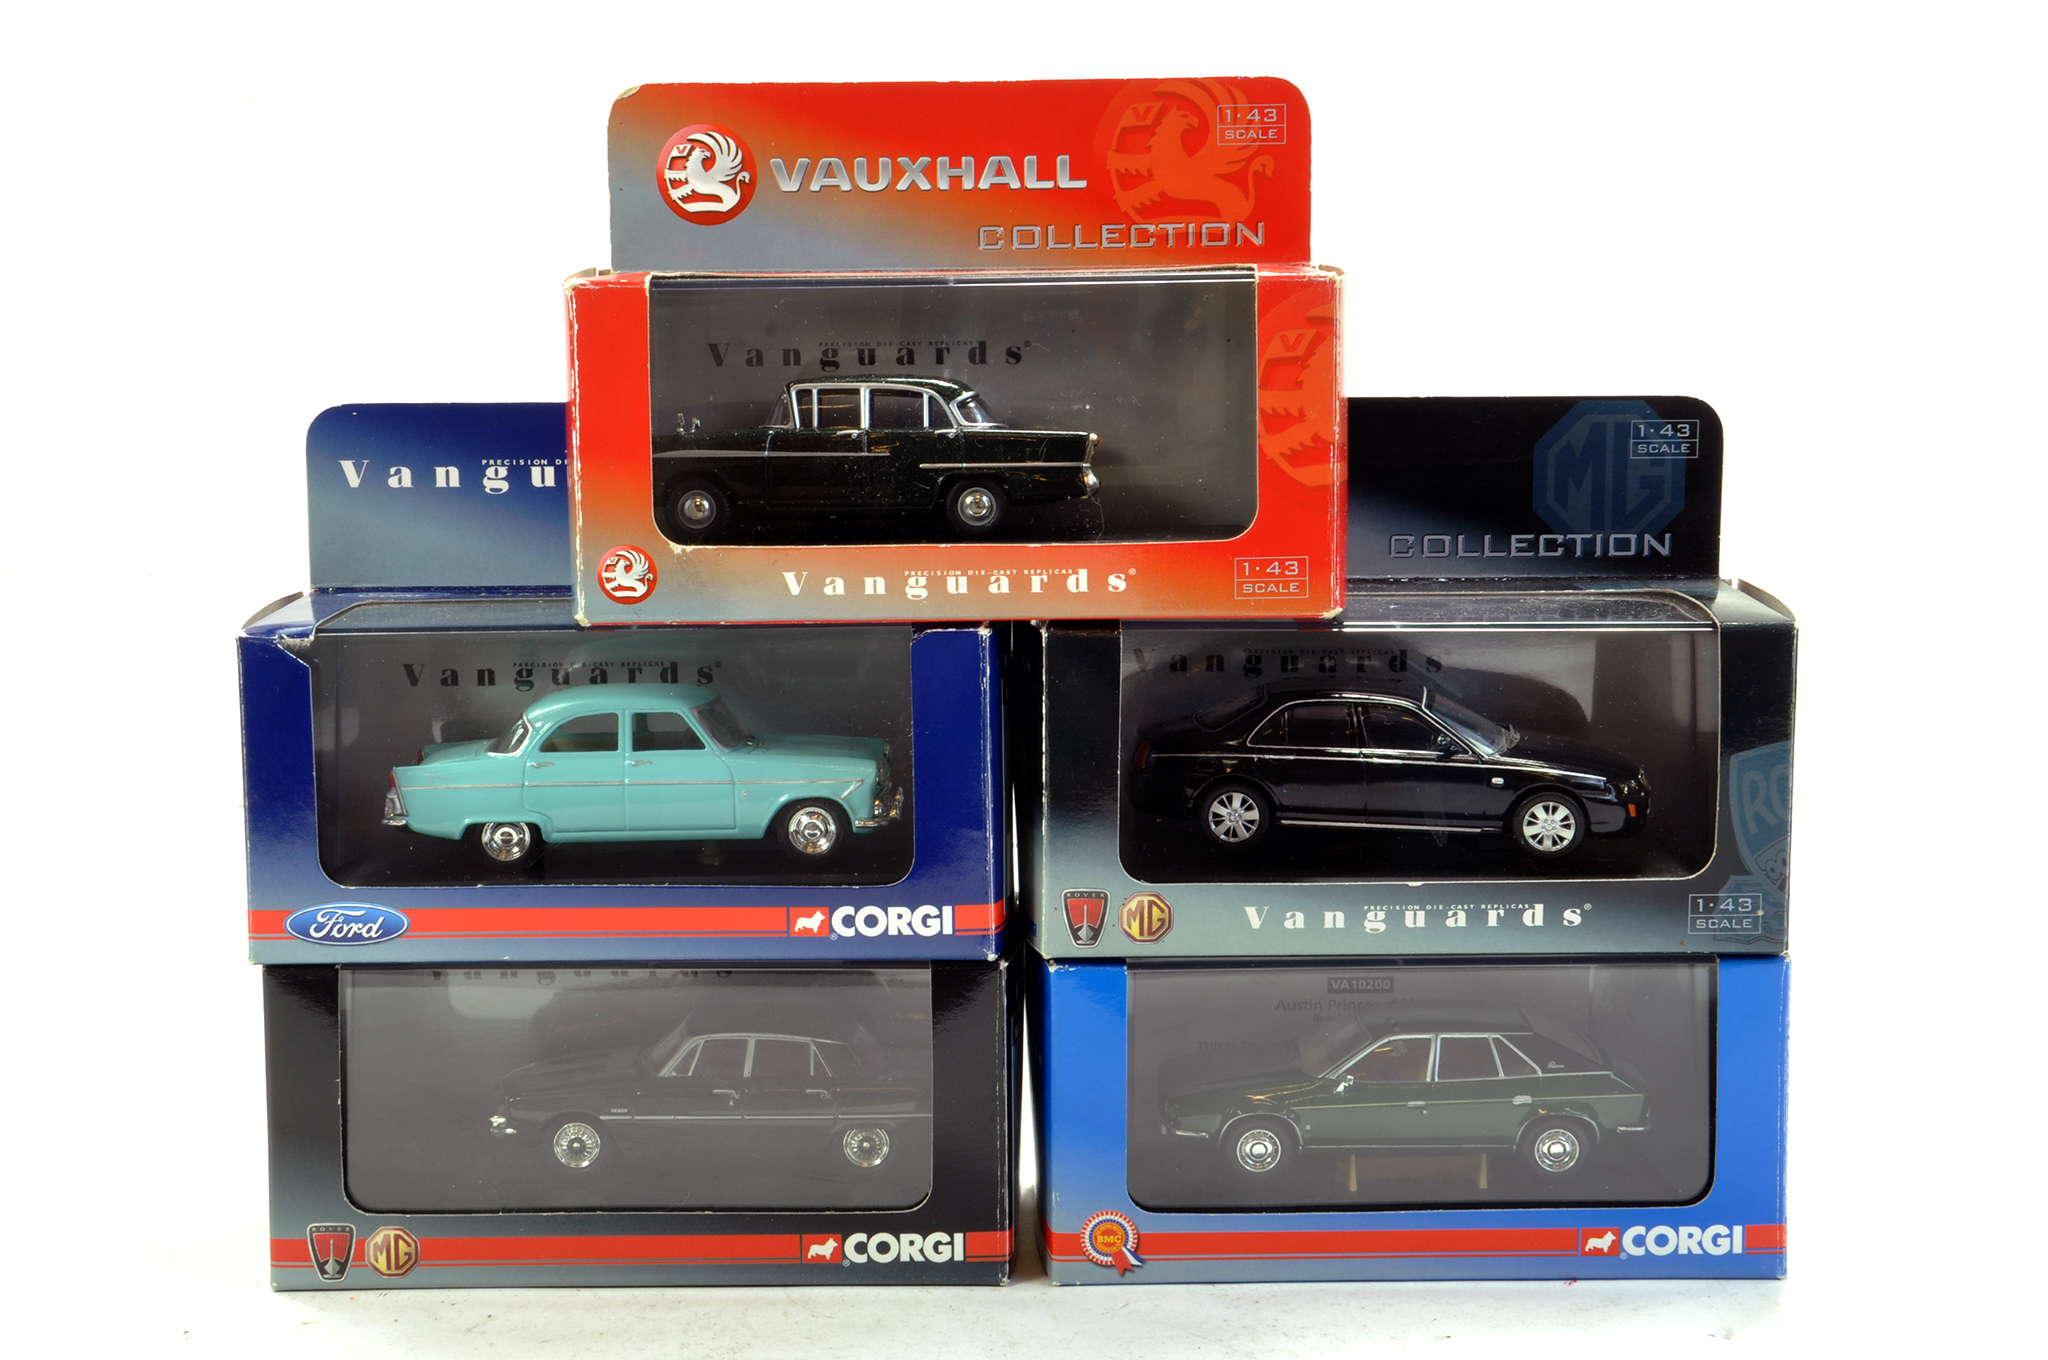 Corgi Vanguards diecast classic car group. Looks to be complete, excellent and with original box/